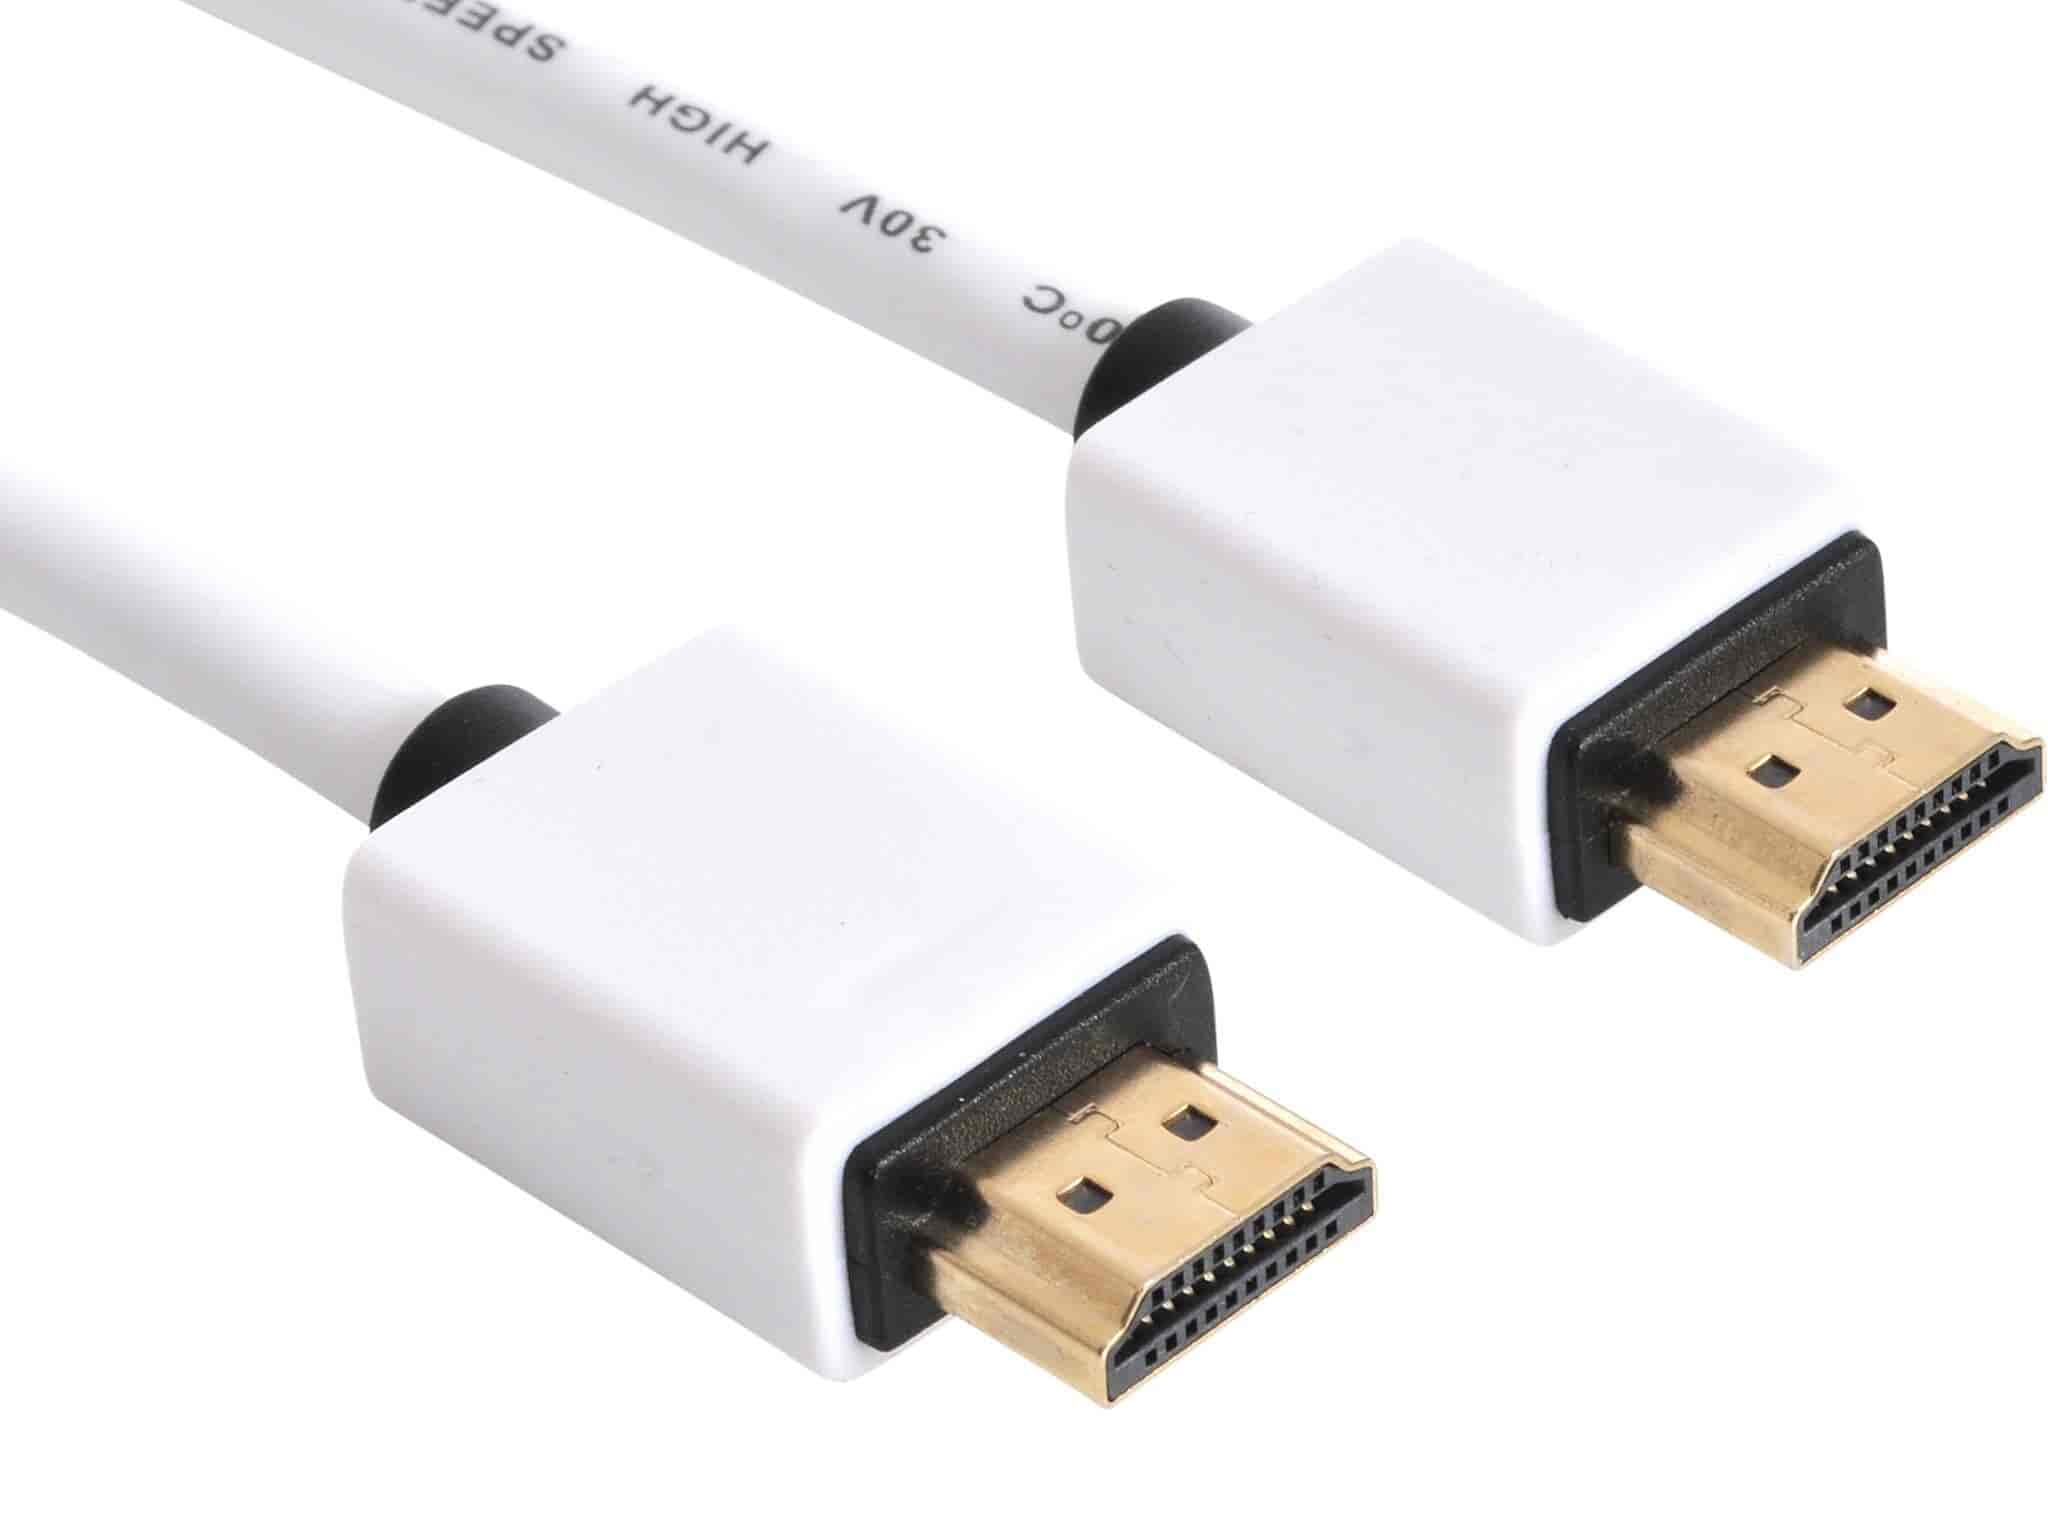 Sandberg HDMI 2.0, 5m SAVERYou can use this cable to connect HDMI devices like your DVD player or games console to your TV with an HDMI connector.Sandberg